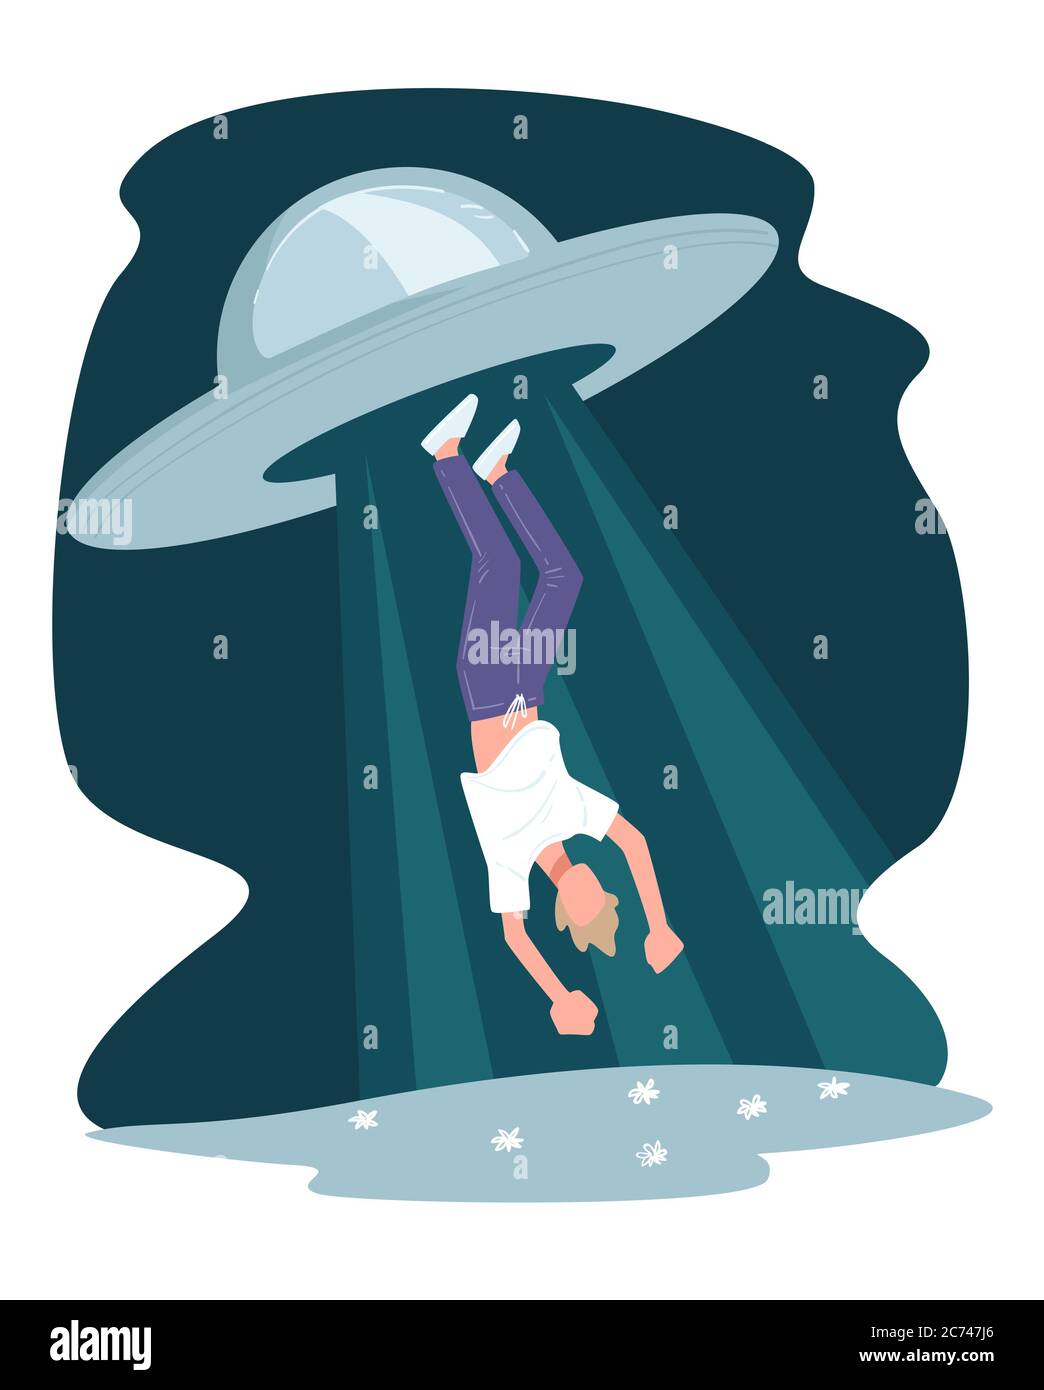 Man abducted by aliens, ufo flying saucer kidnapping Stock Vector